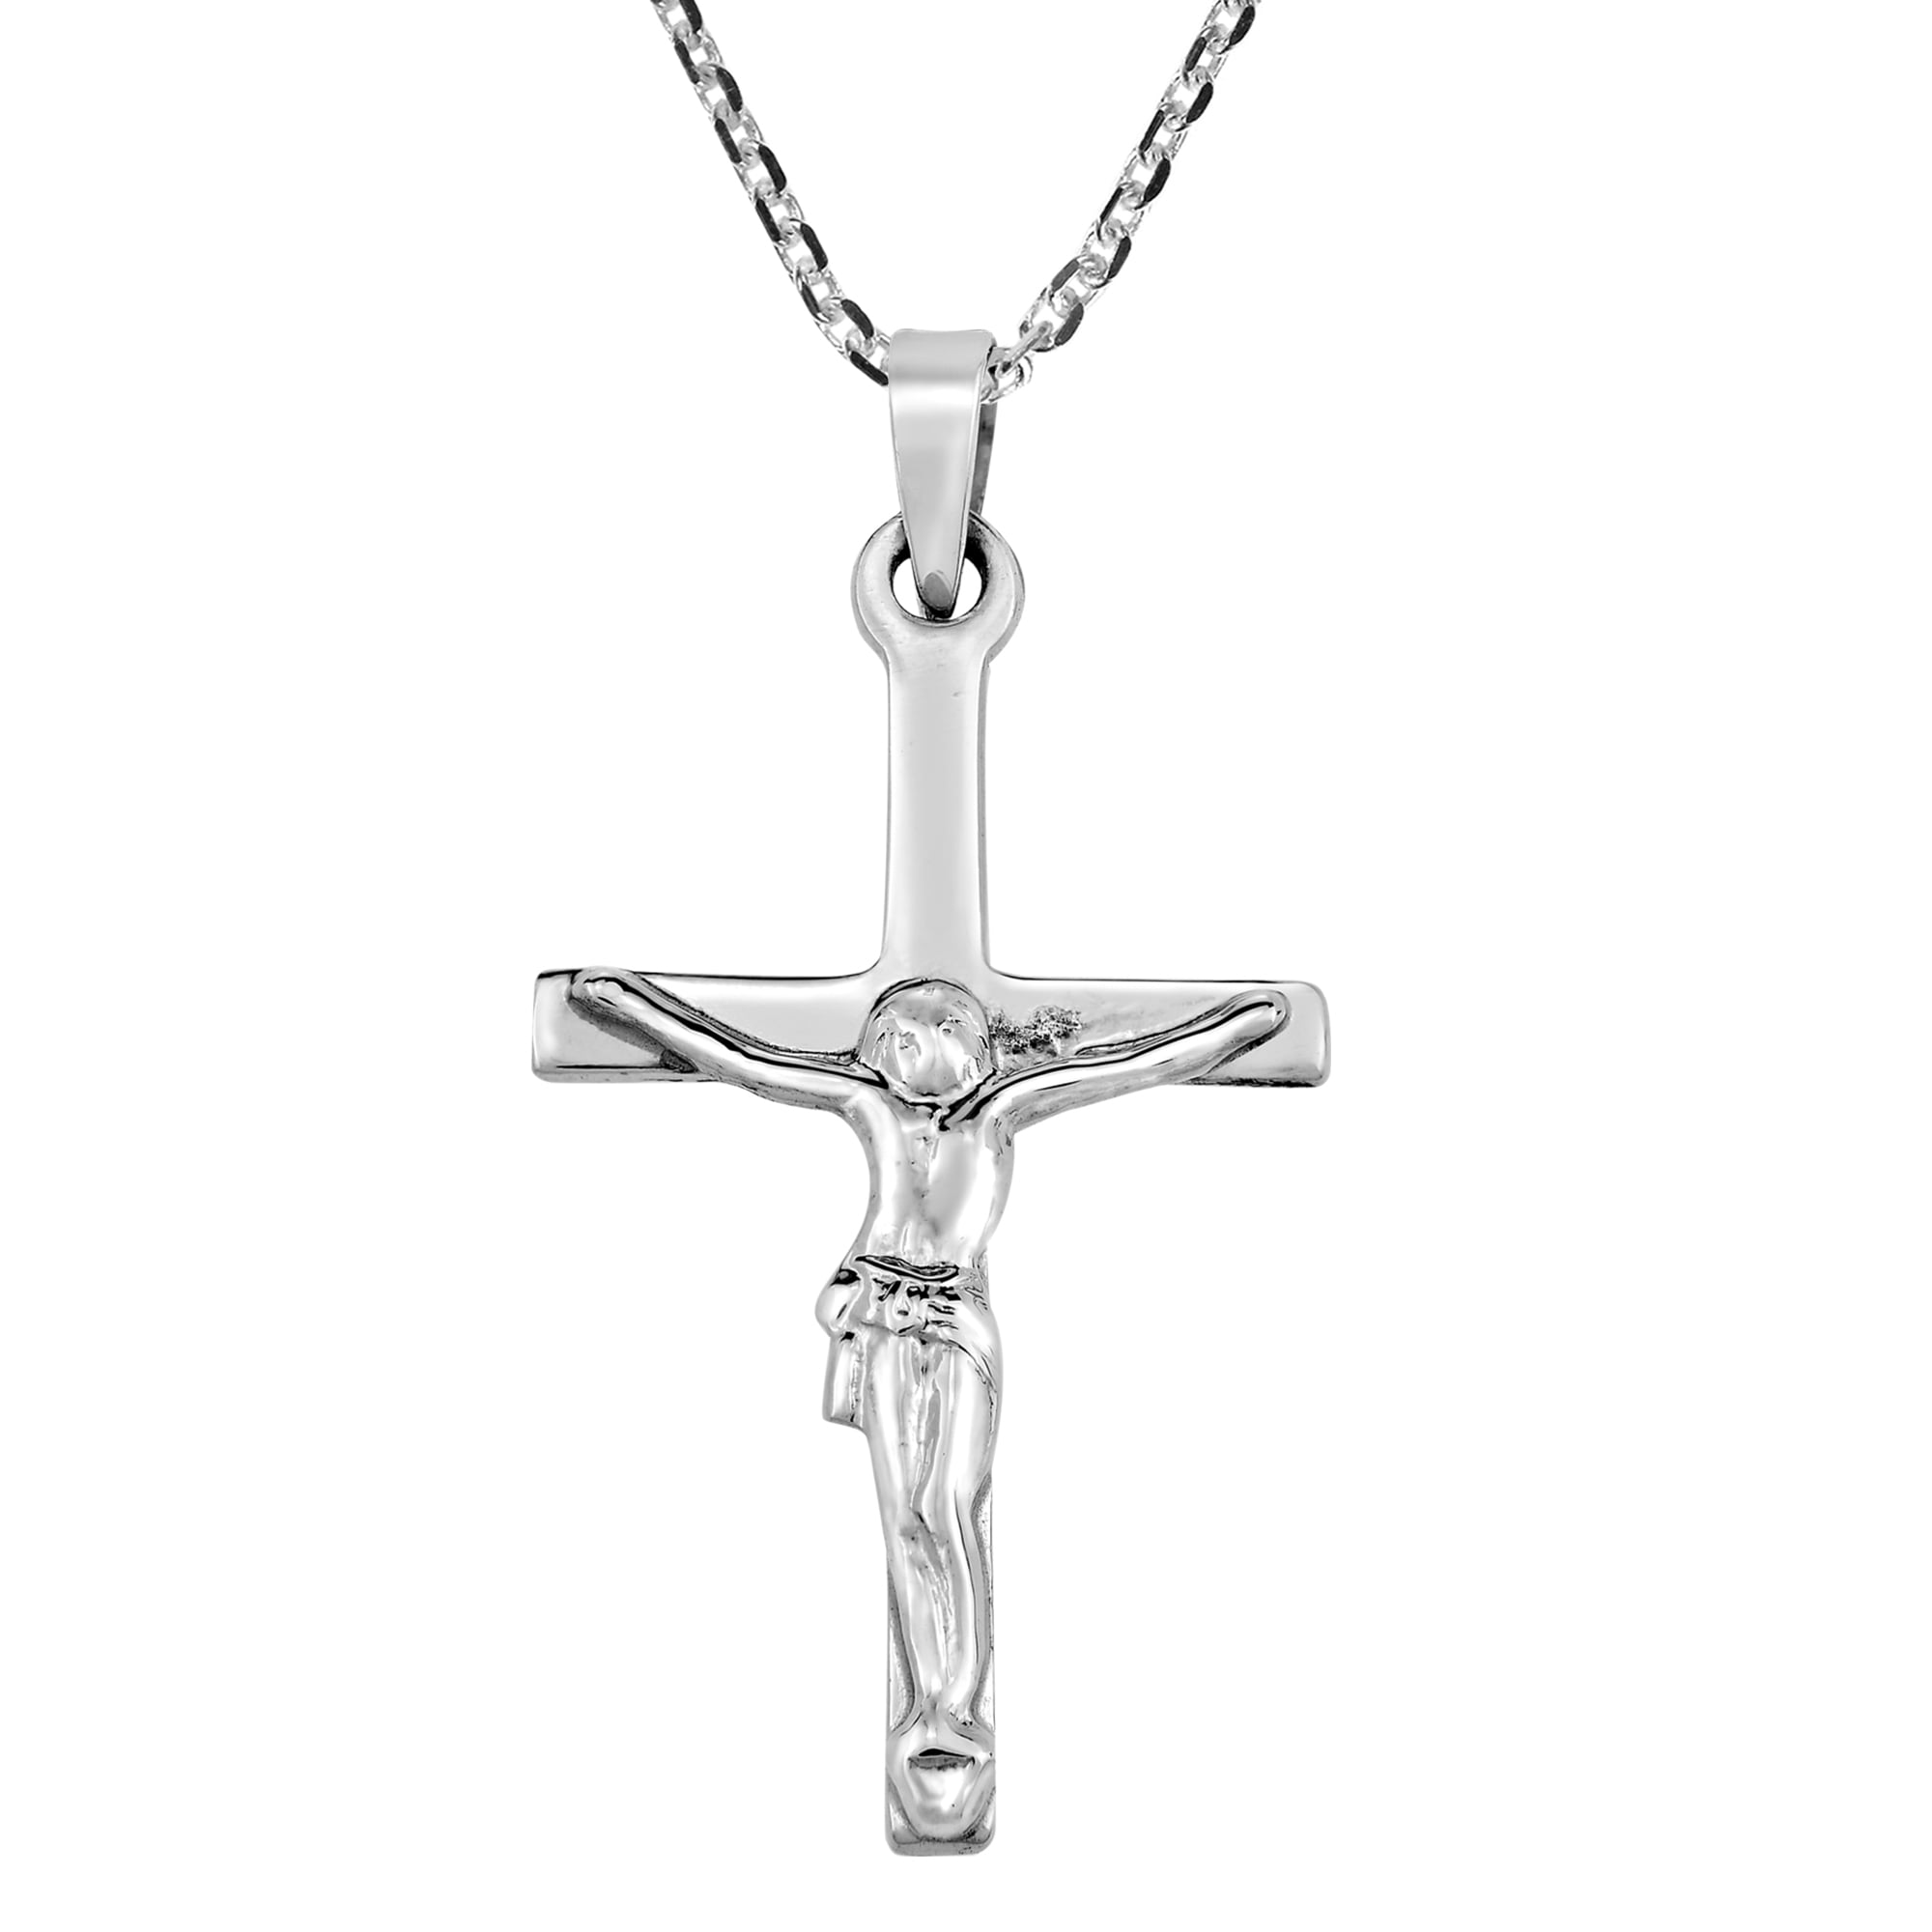 ChicSilver Personalized 925 Sterling Silver Catholic Jesus Christ on INRI Cross Crucifix Pendant Necklace for Women Men with Gift Box